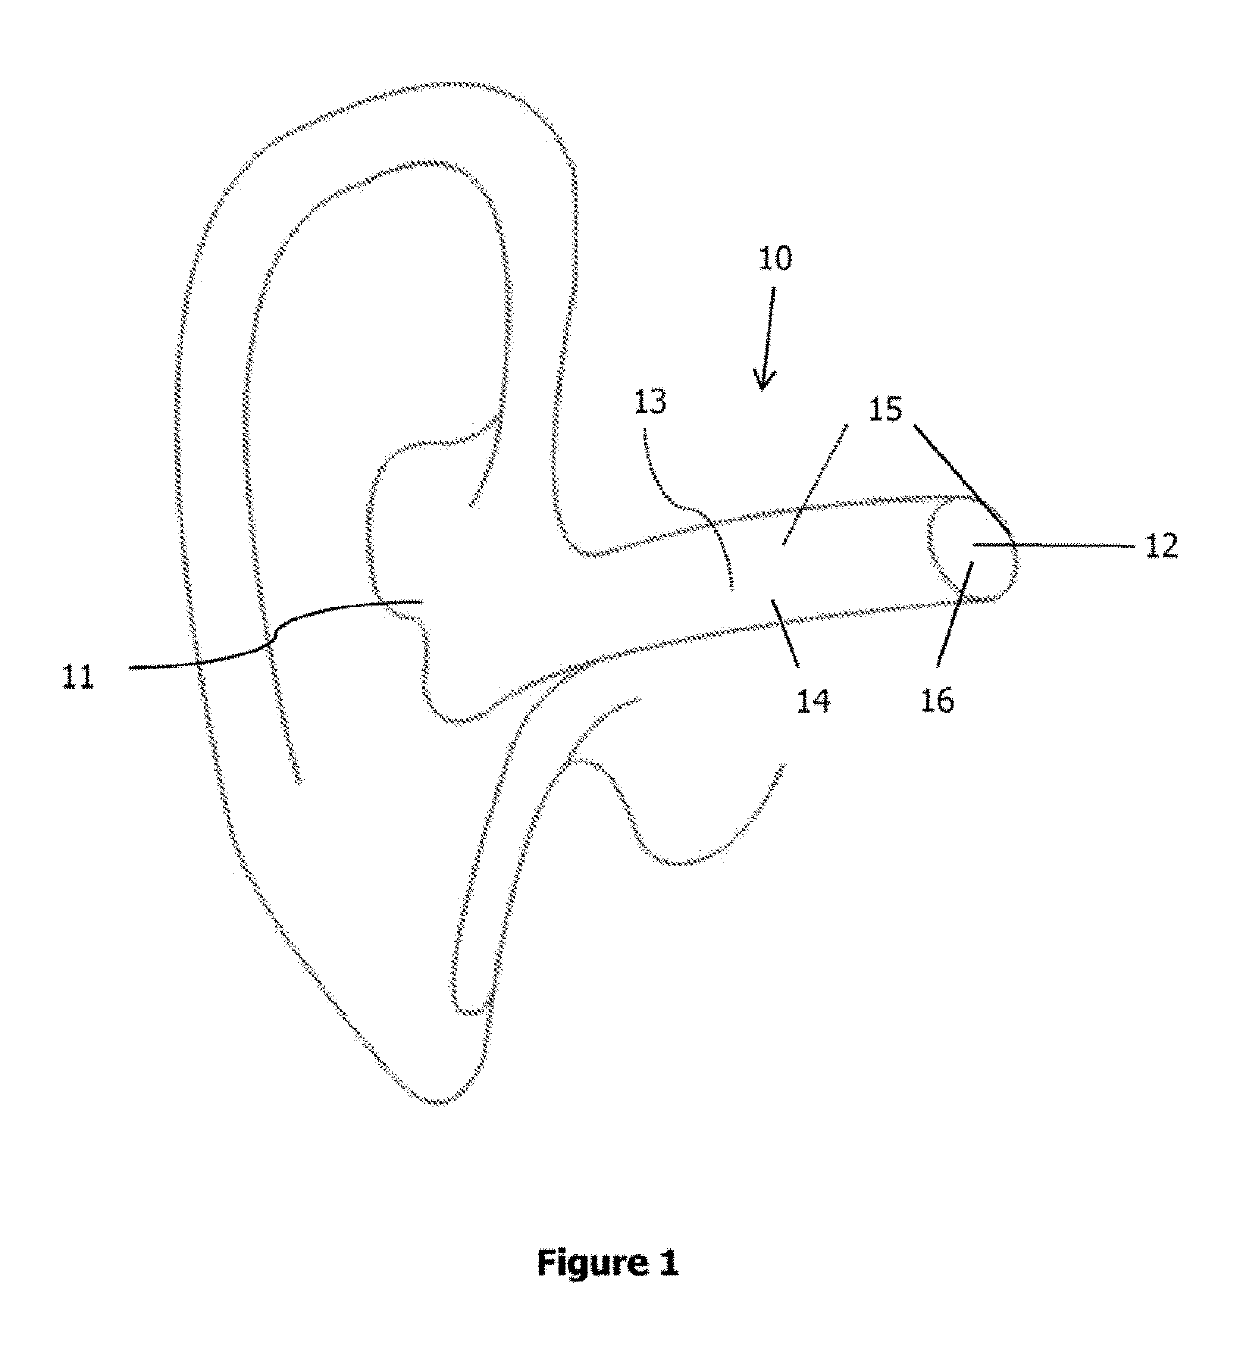 Electro-stimulation device for innervation of the external ear canal